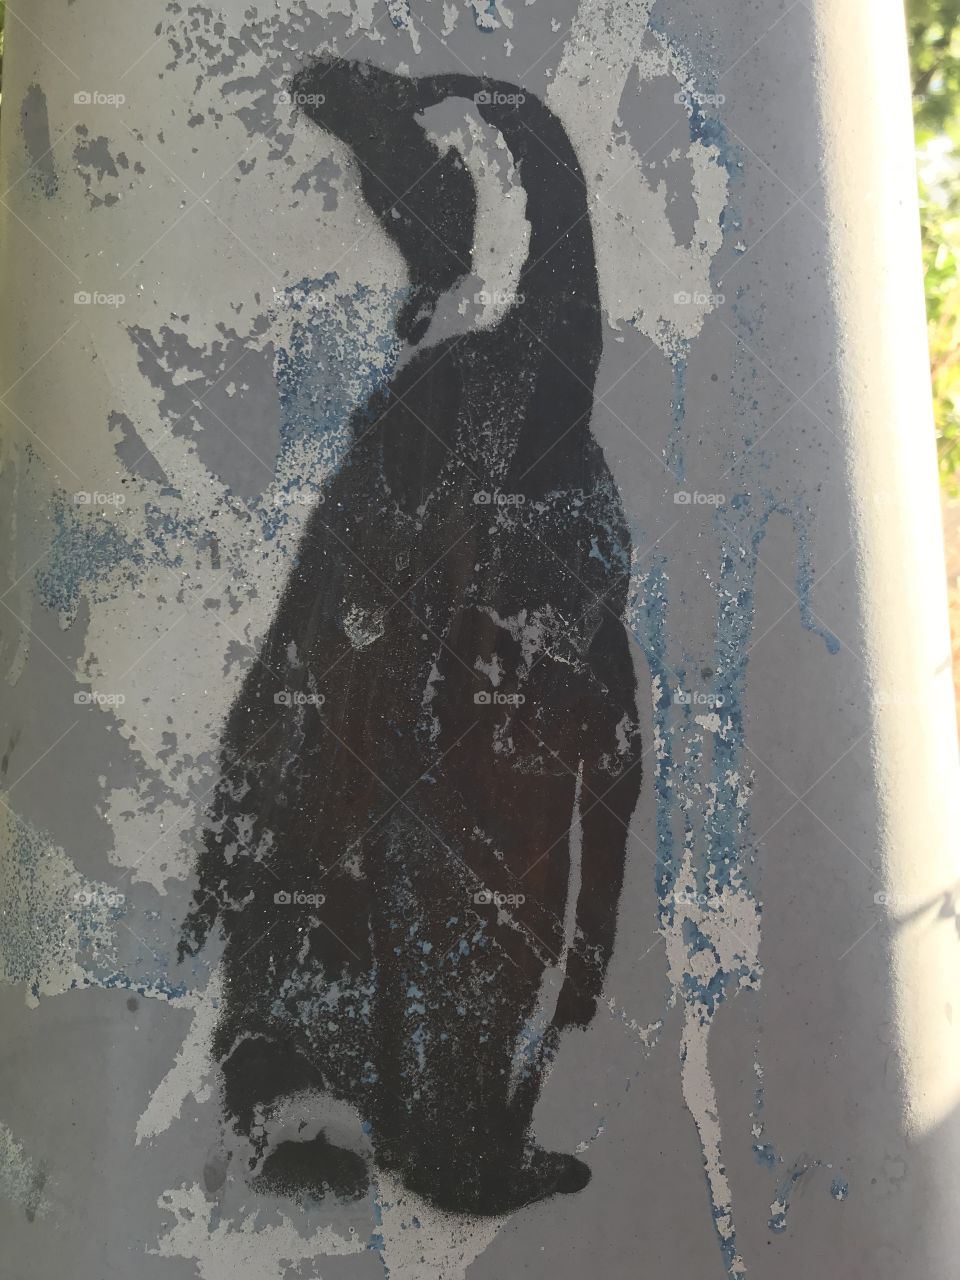 Someone’s artwork on a telephone pole. Remember the ice caps. Let’s do our part to slow Global Warming. 